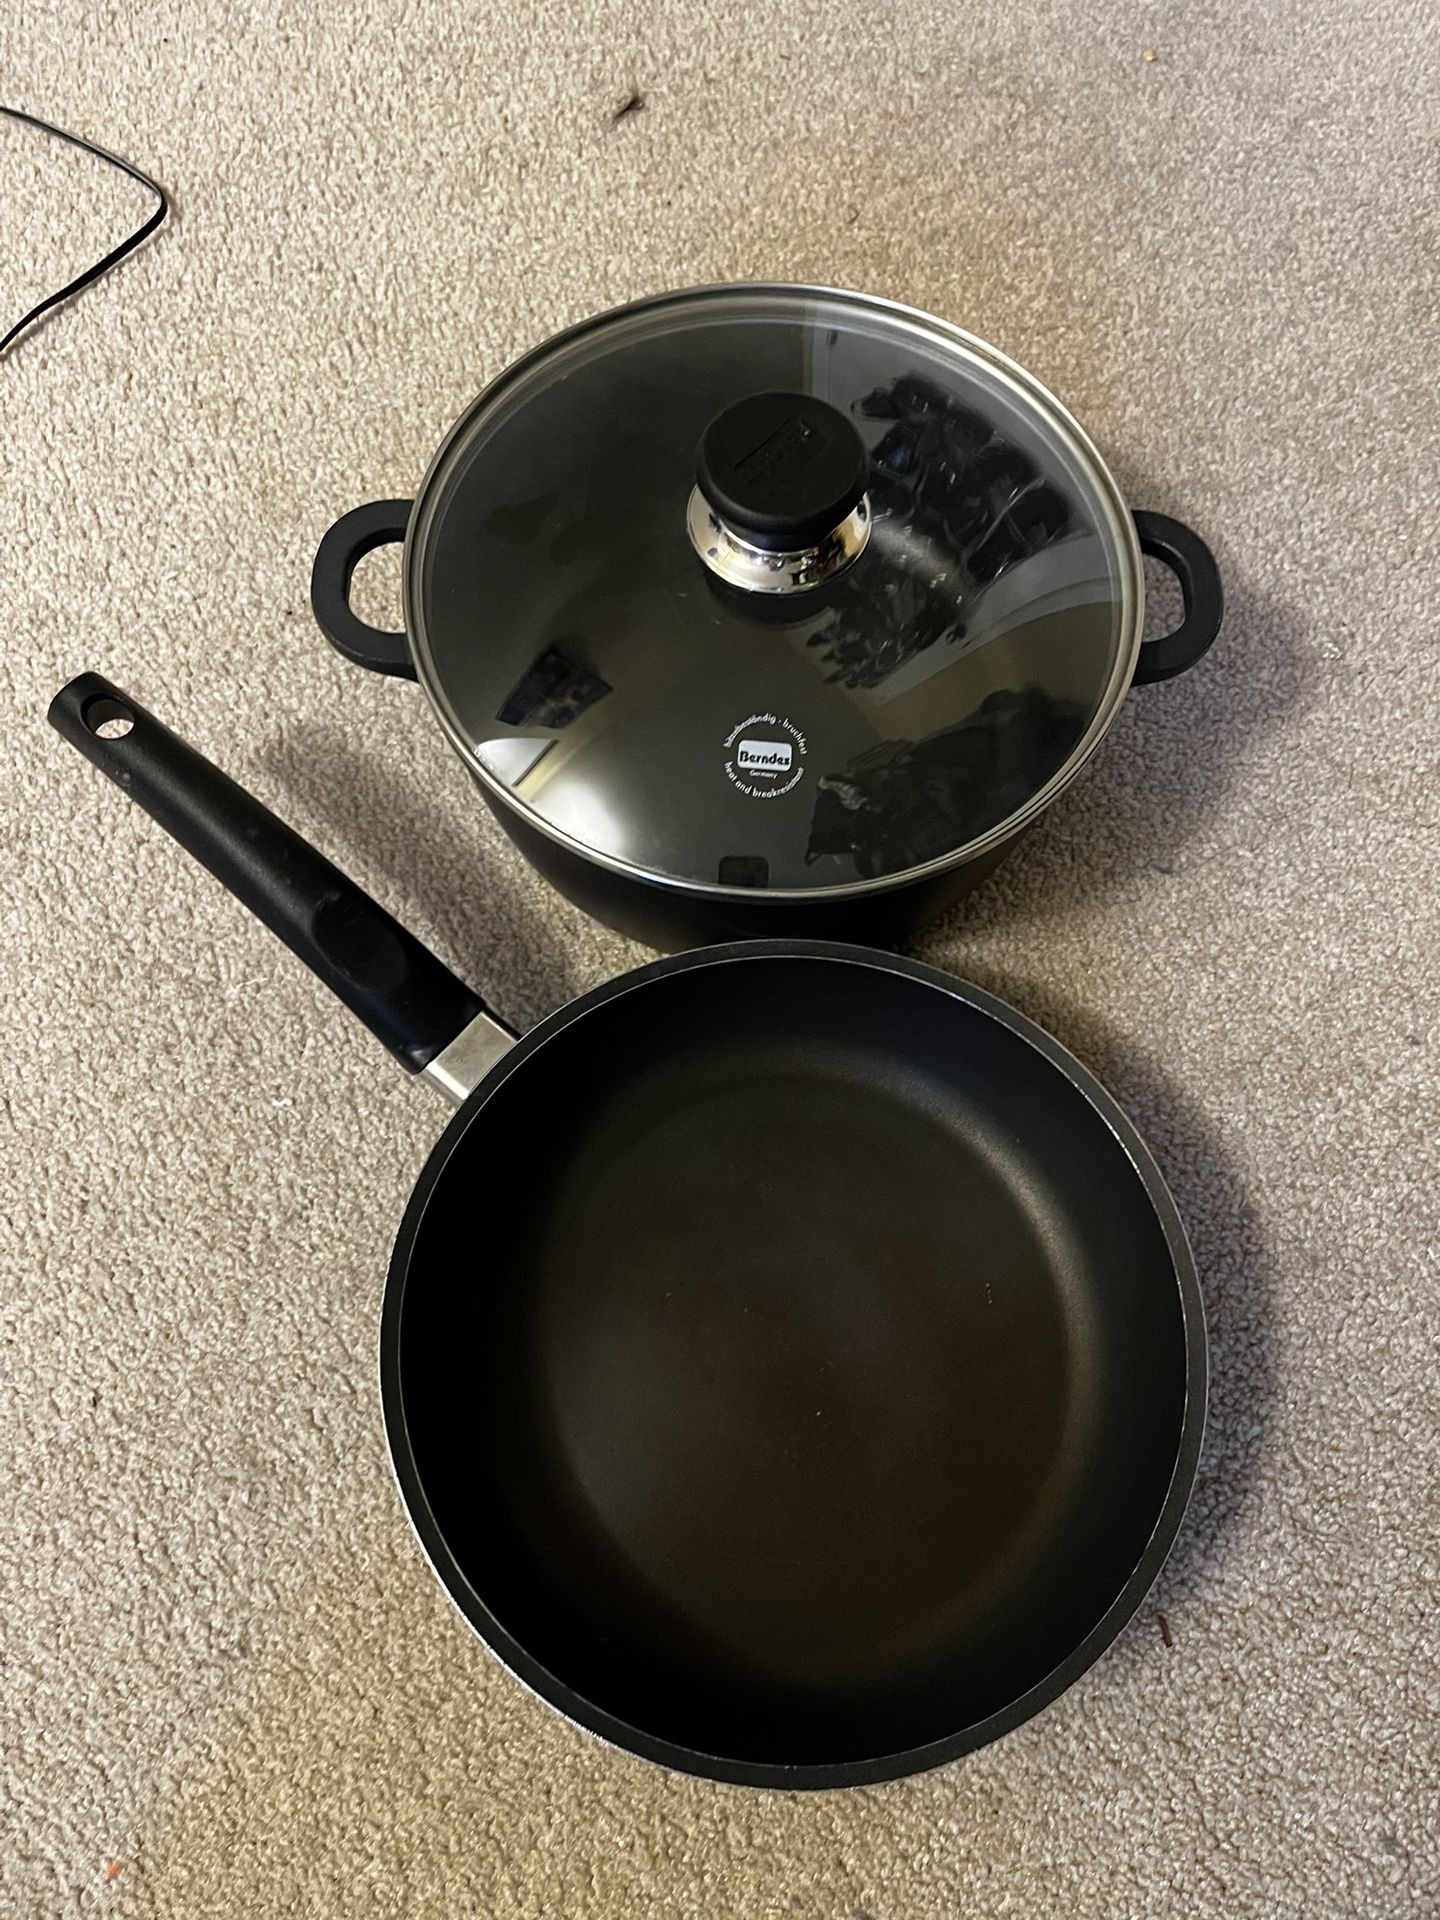 Berndes cookware for Sale in Mukilteo, WA - OfferUp